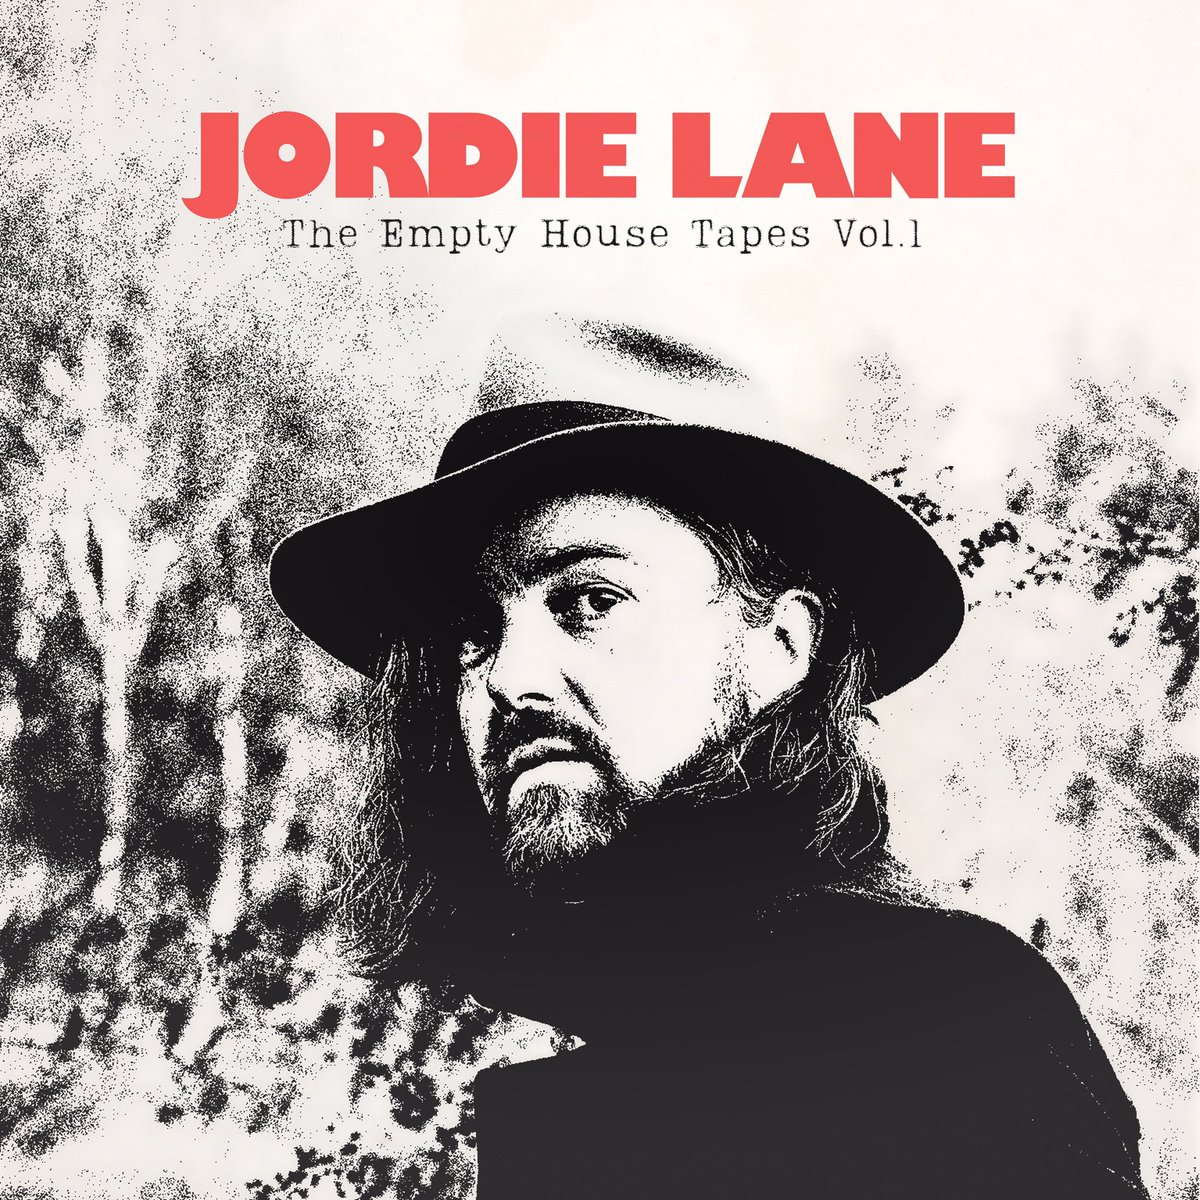 surprise announcement today, that I have a new EP, The Empty House Tapes Vol. 1 coming September 15th. Digital & Limited Edition Cassette Pre Orders start now. And the first round of Aussie Tour Dates are on sale too! Pre Orders and Tickets: linktr.ee/jordielanemusic